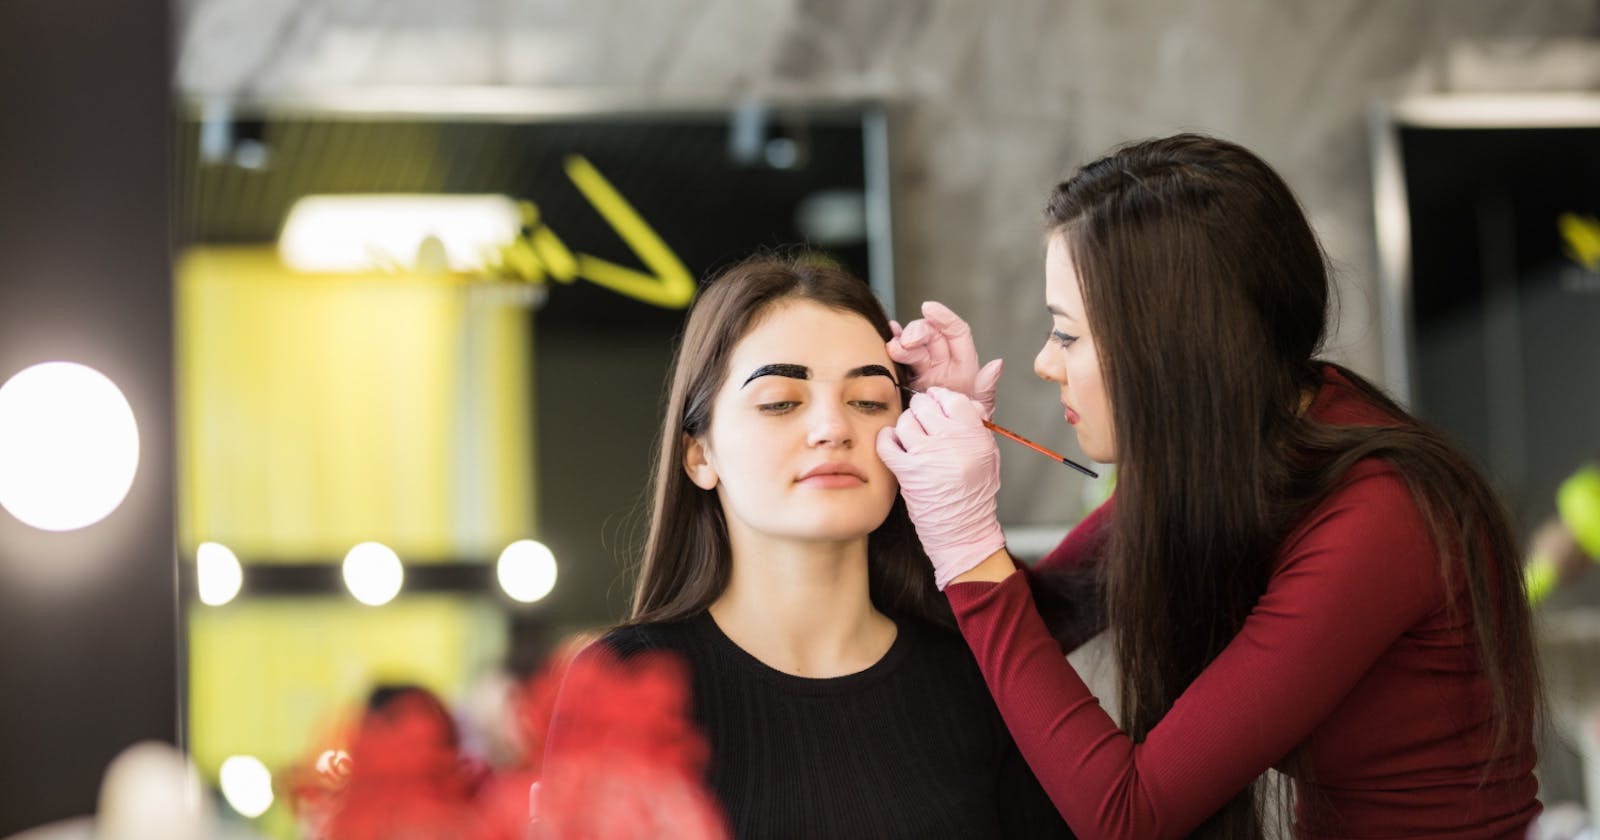 Types of Makeovers You Can Do for Your Wedding